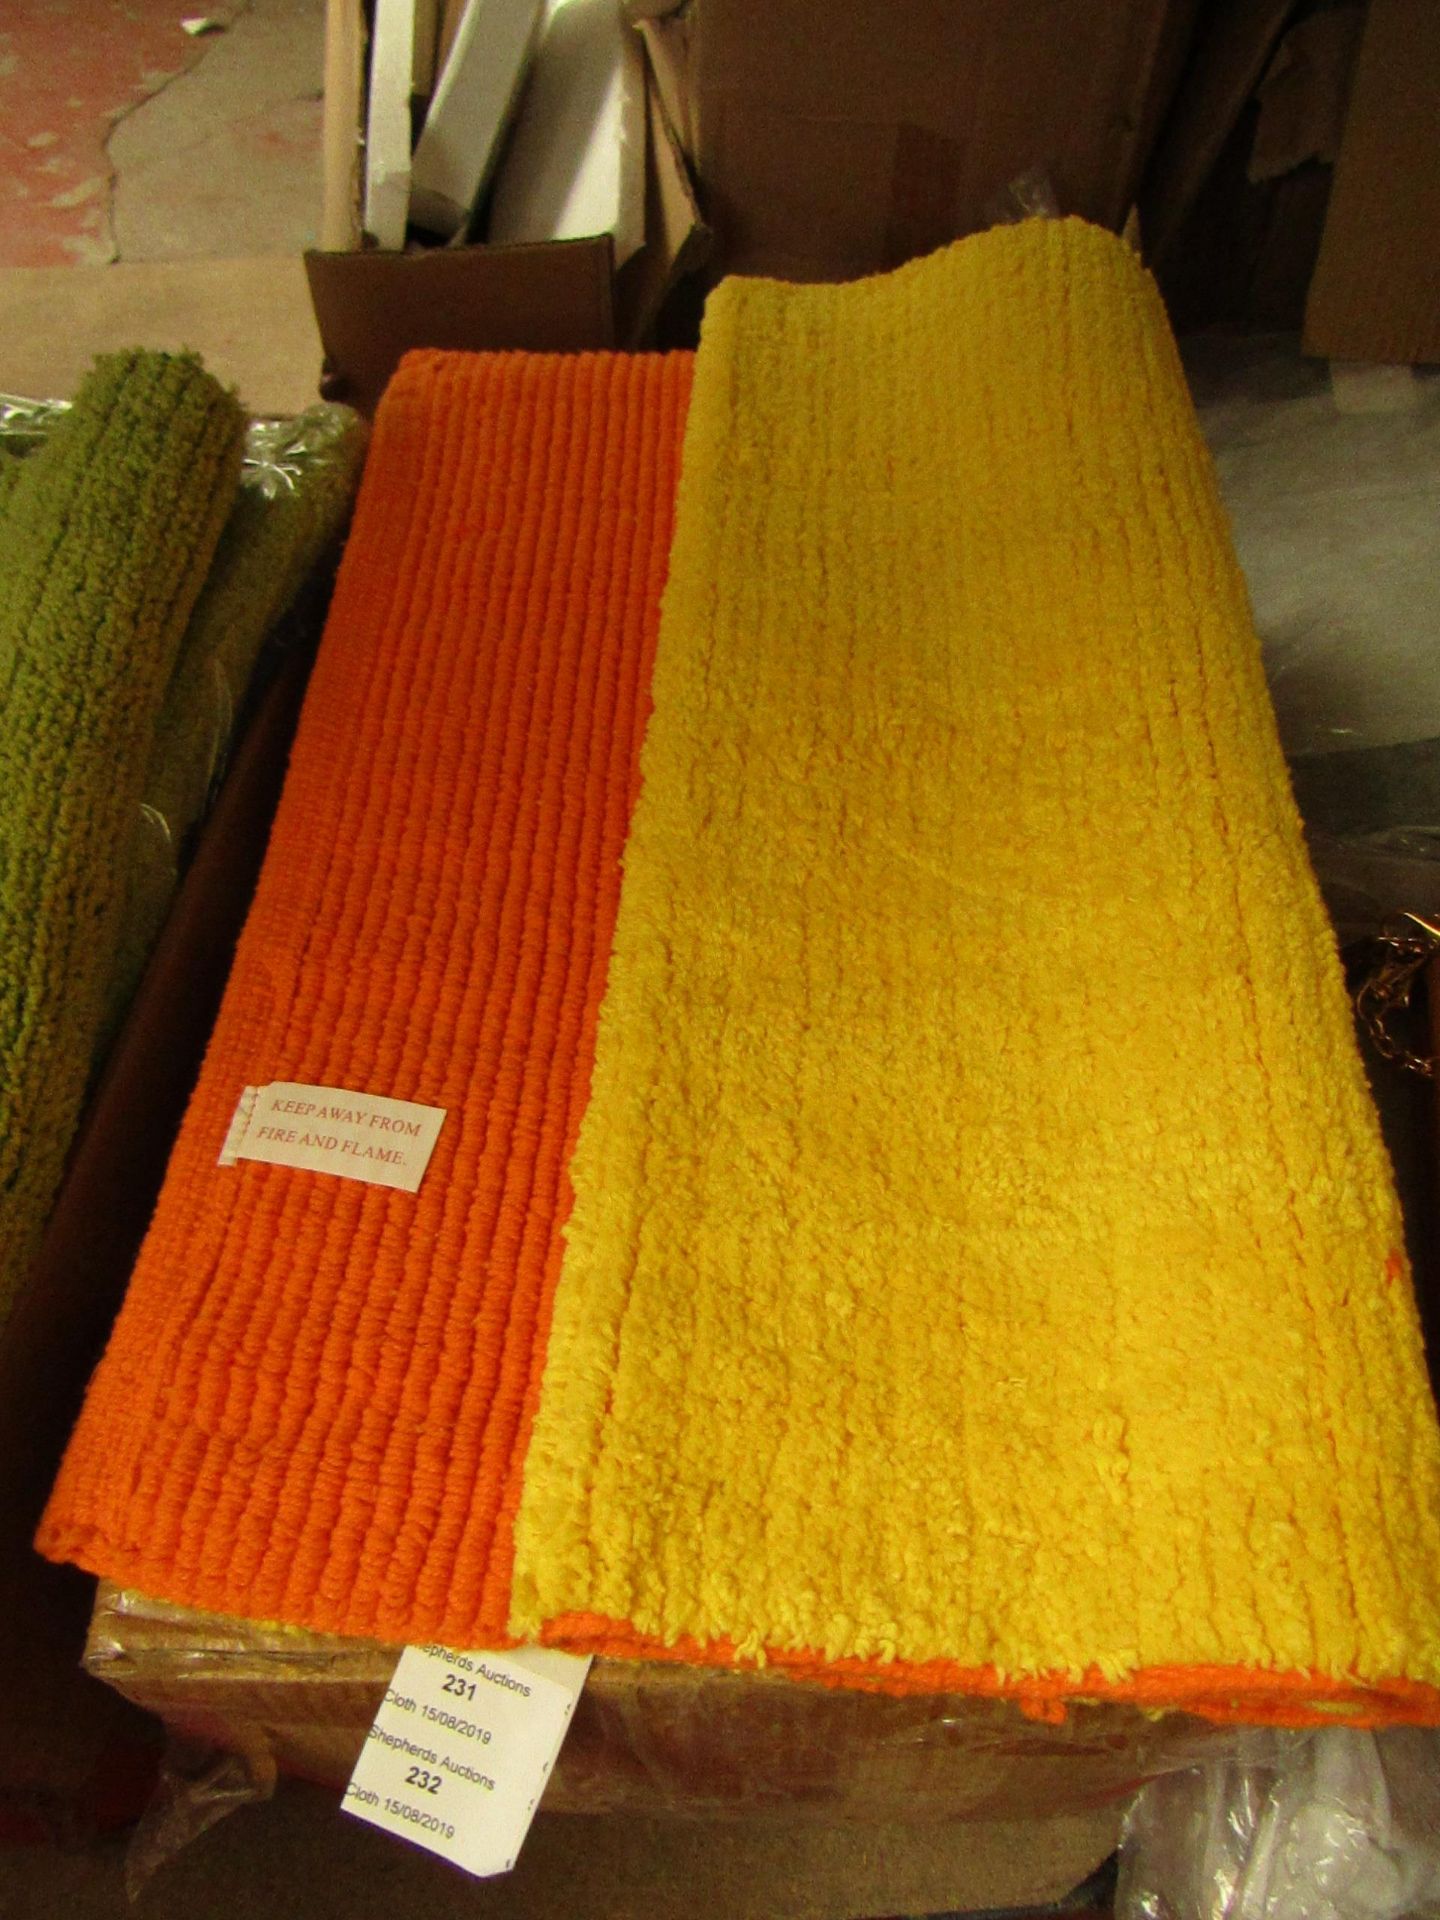 Duo Large Luxury Bath Mat in Clementine/Yellow new & packaged